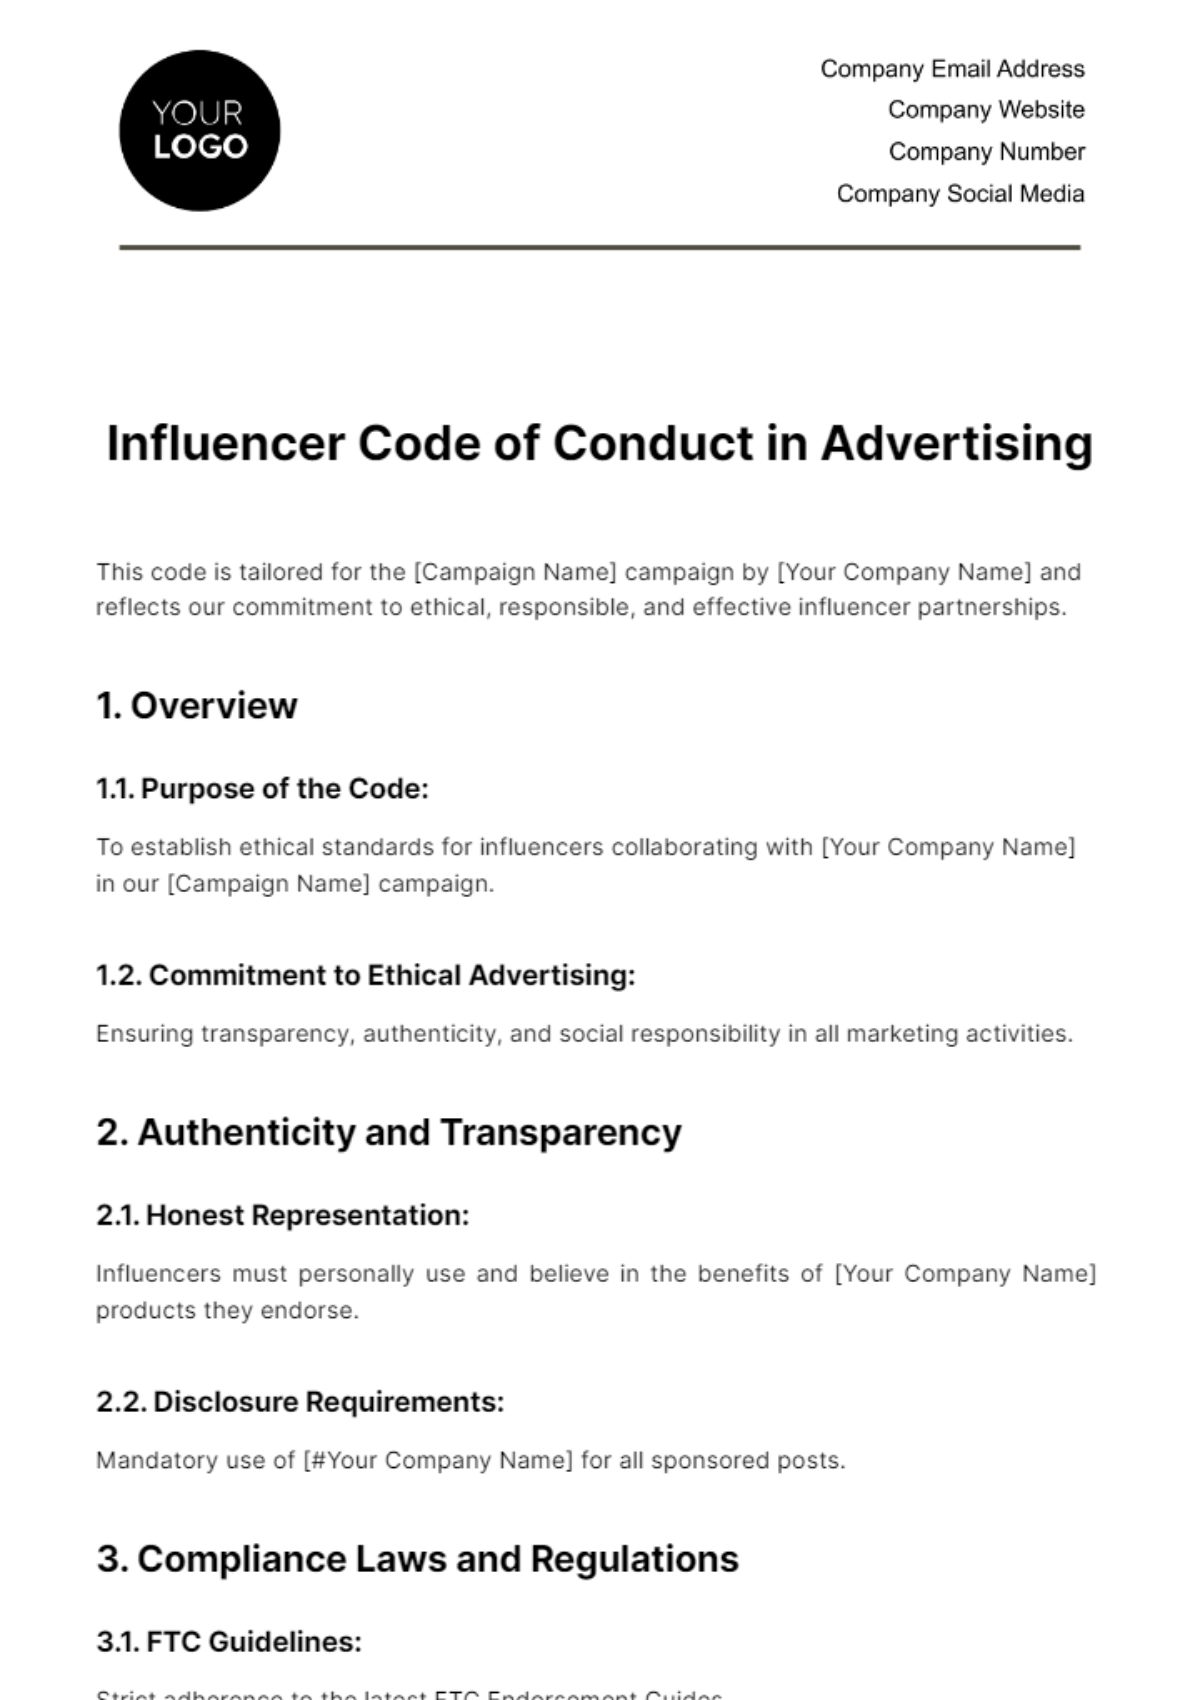 Free Influencer Code of Conduct in Advertising Template